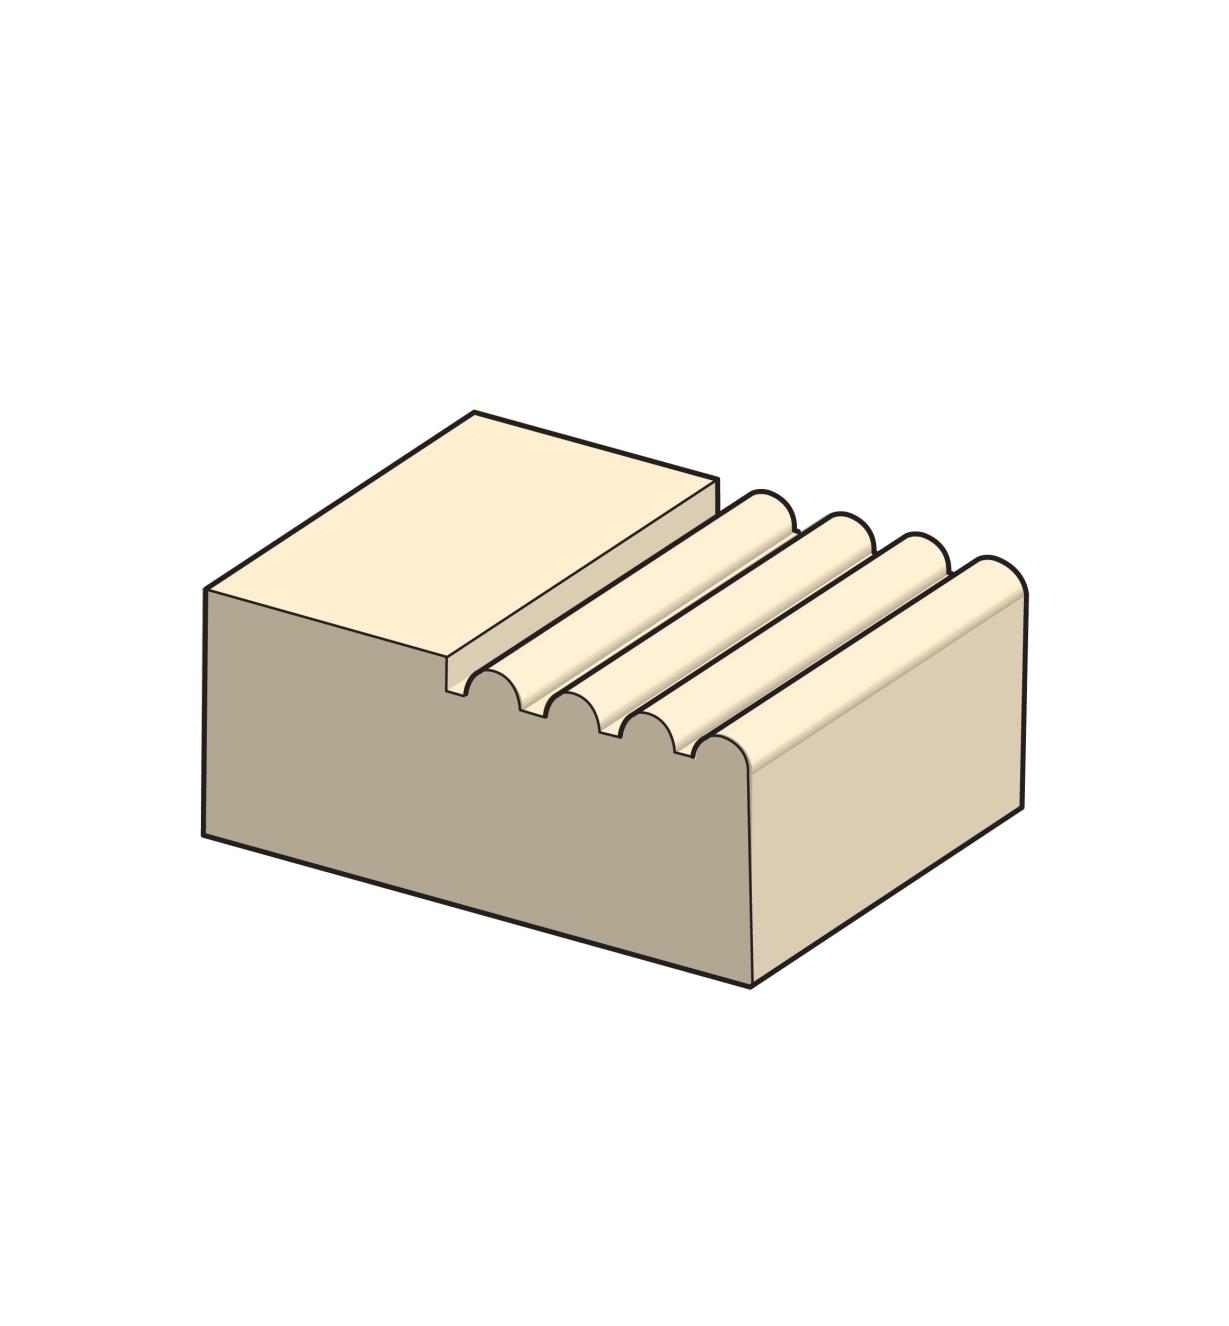 Illustration of a cross section through a block showing the profile of cut the four-reed blade makes